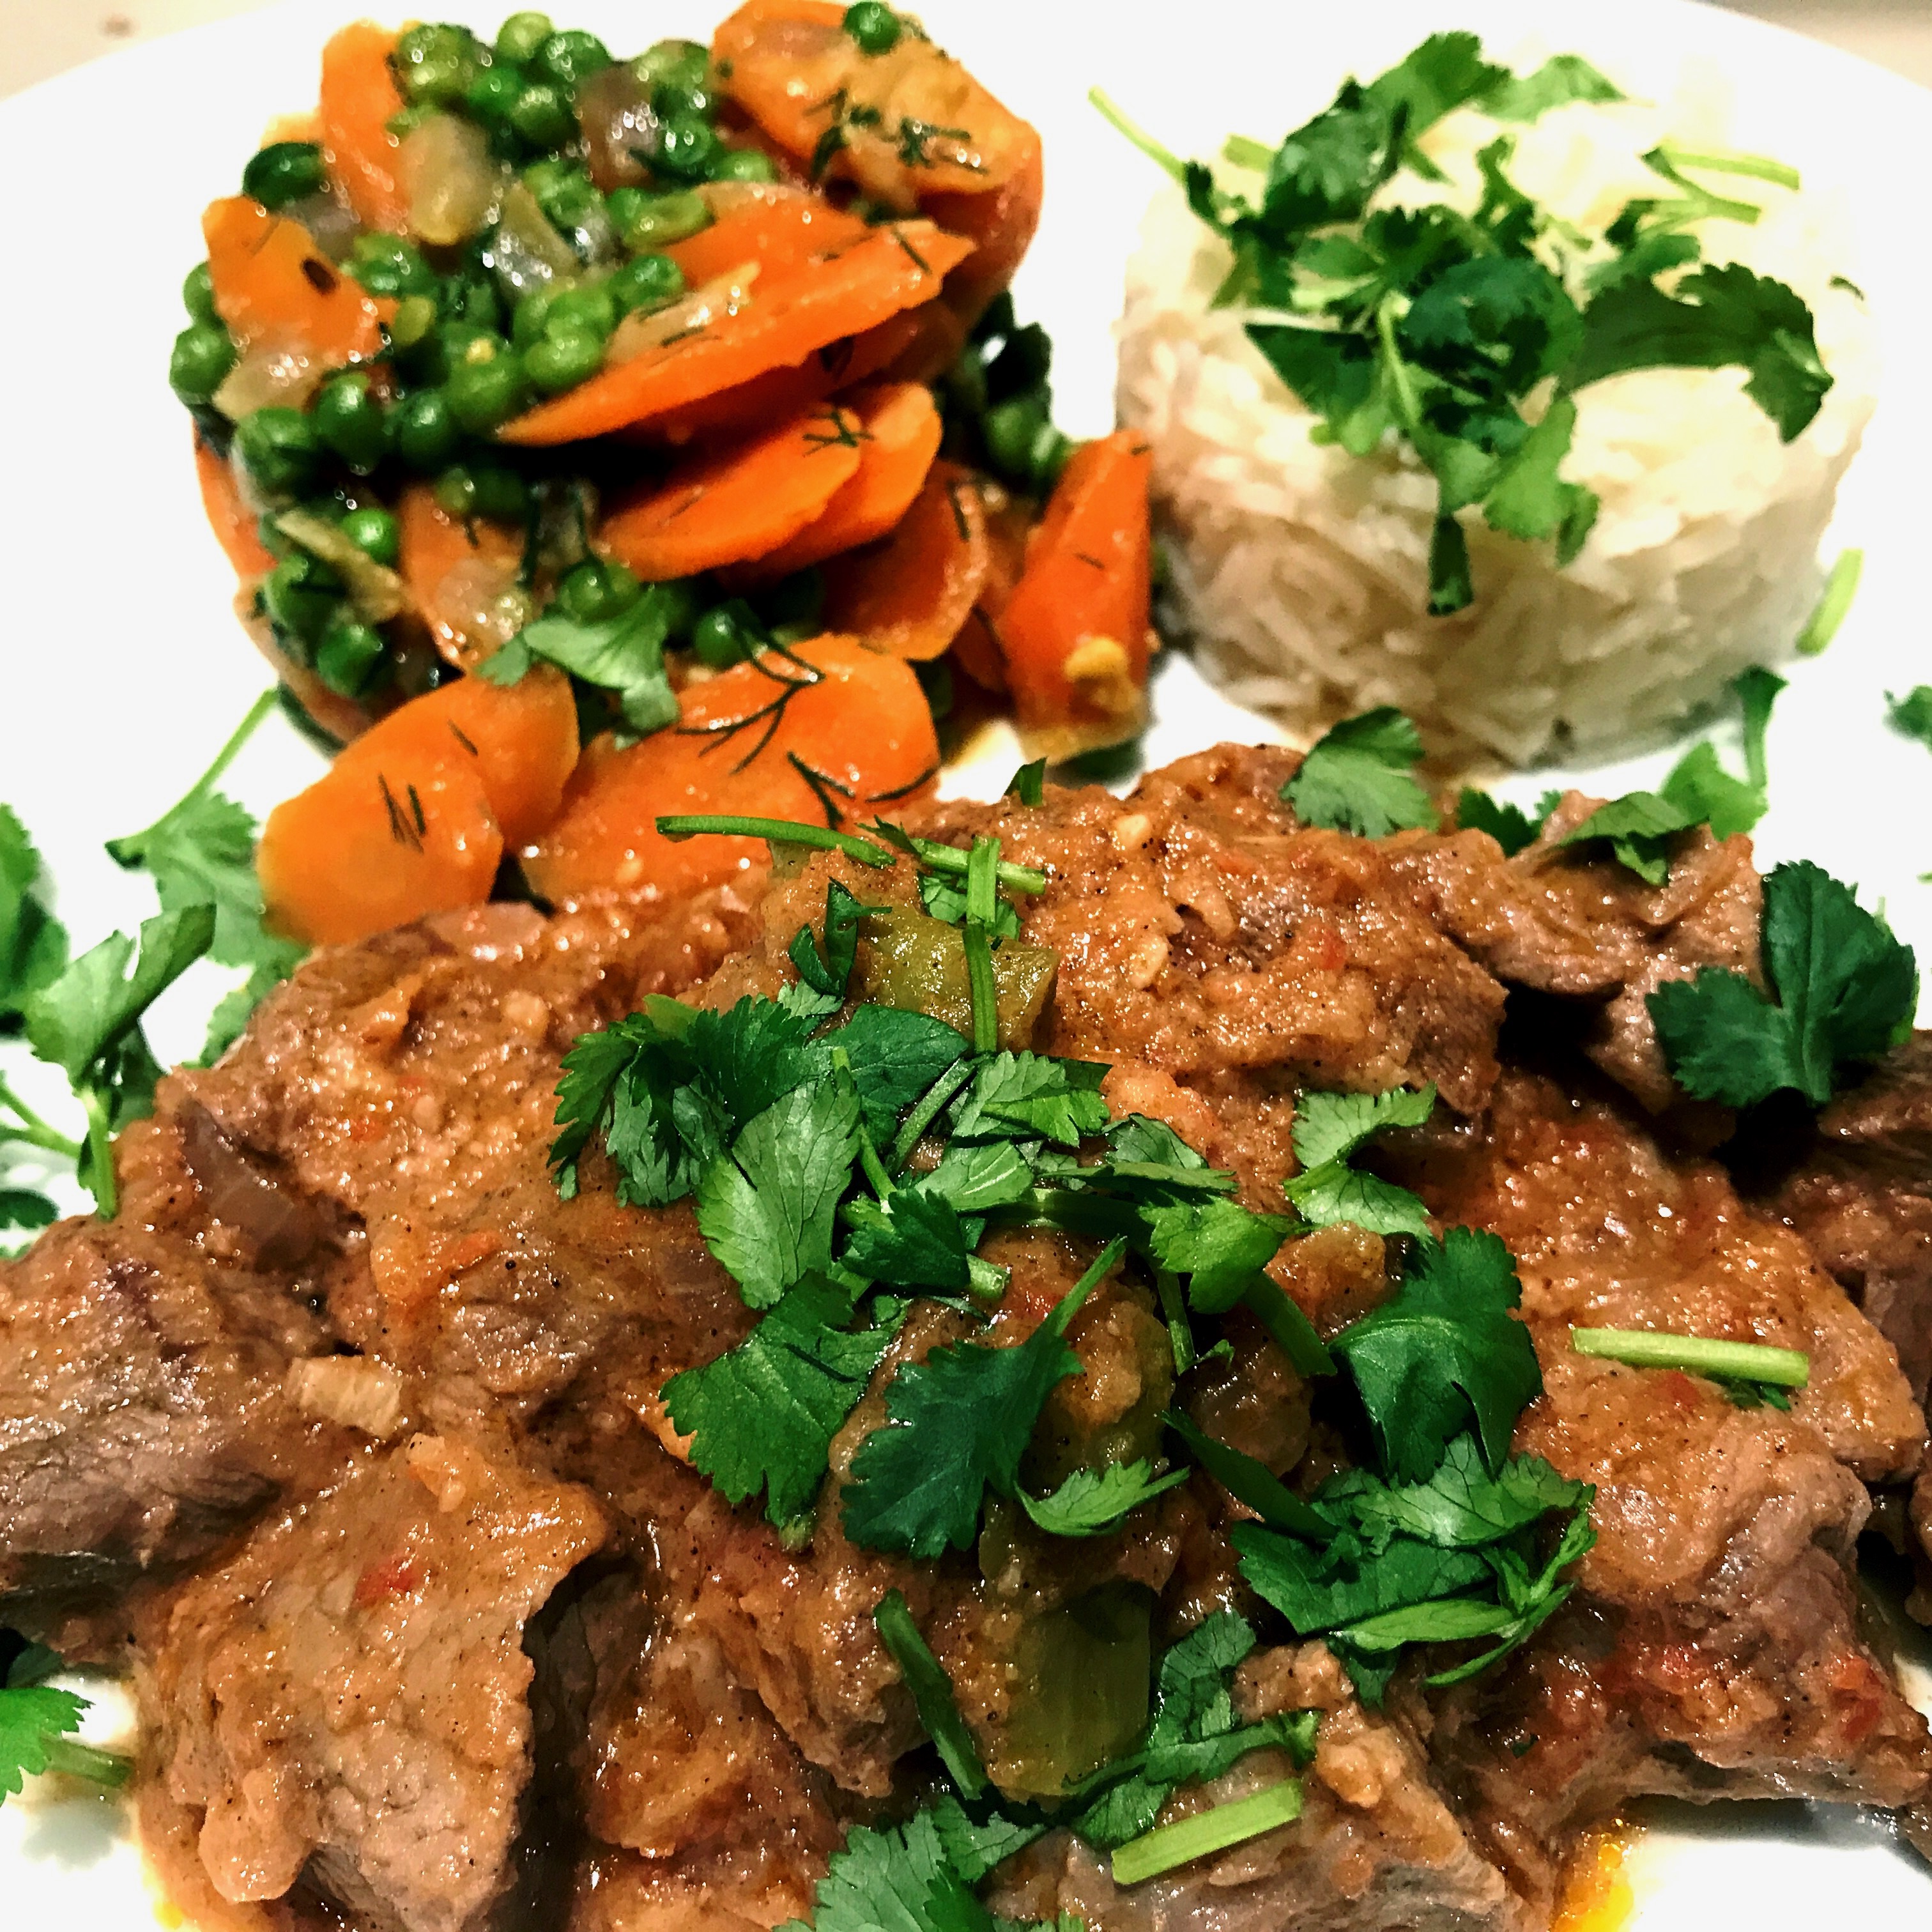 Sindhi cardamom lamb & Carrot slices in dill sauce